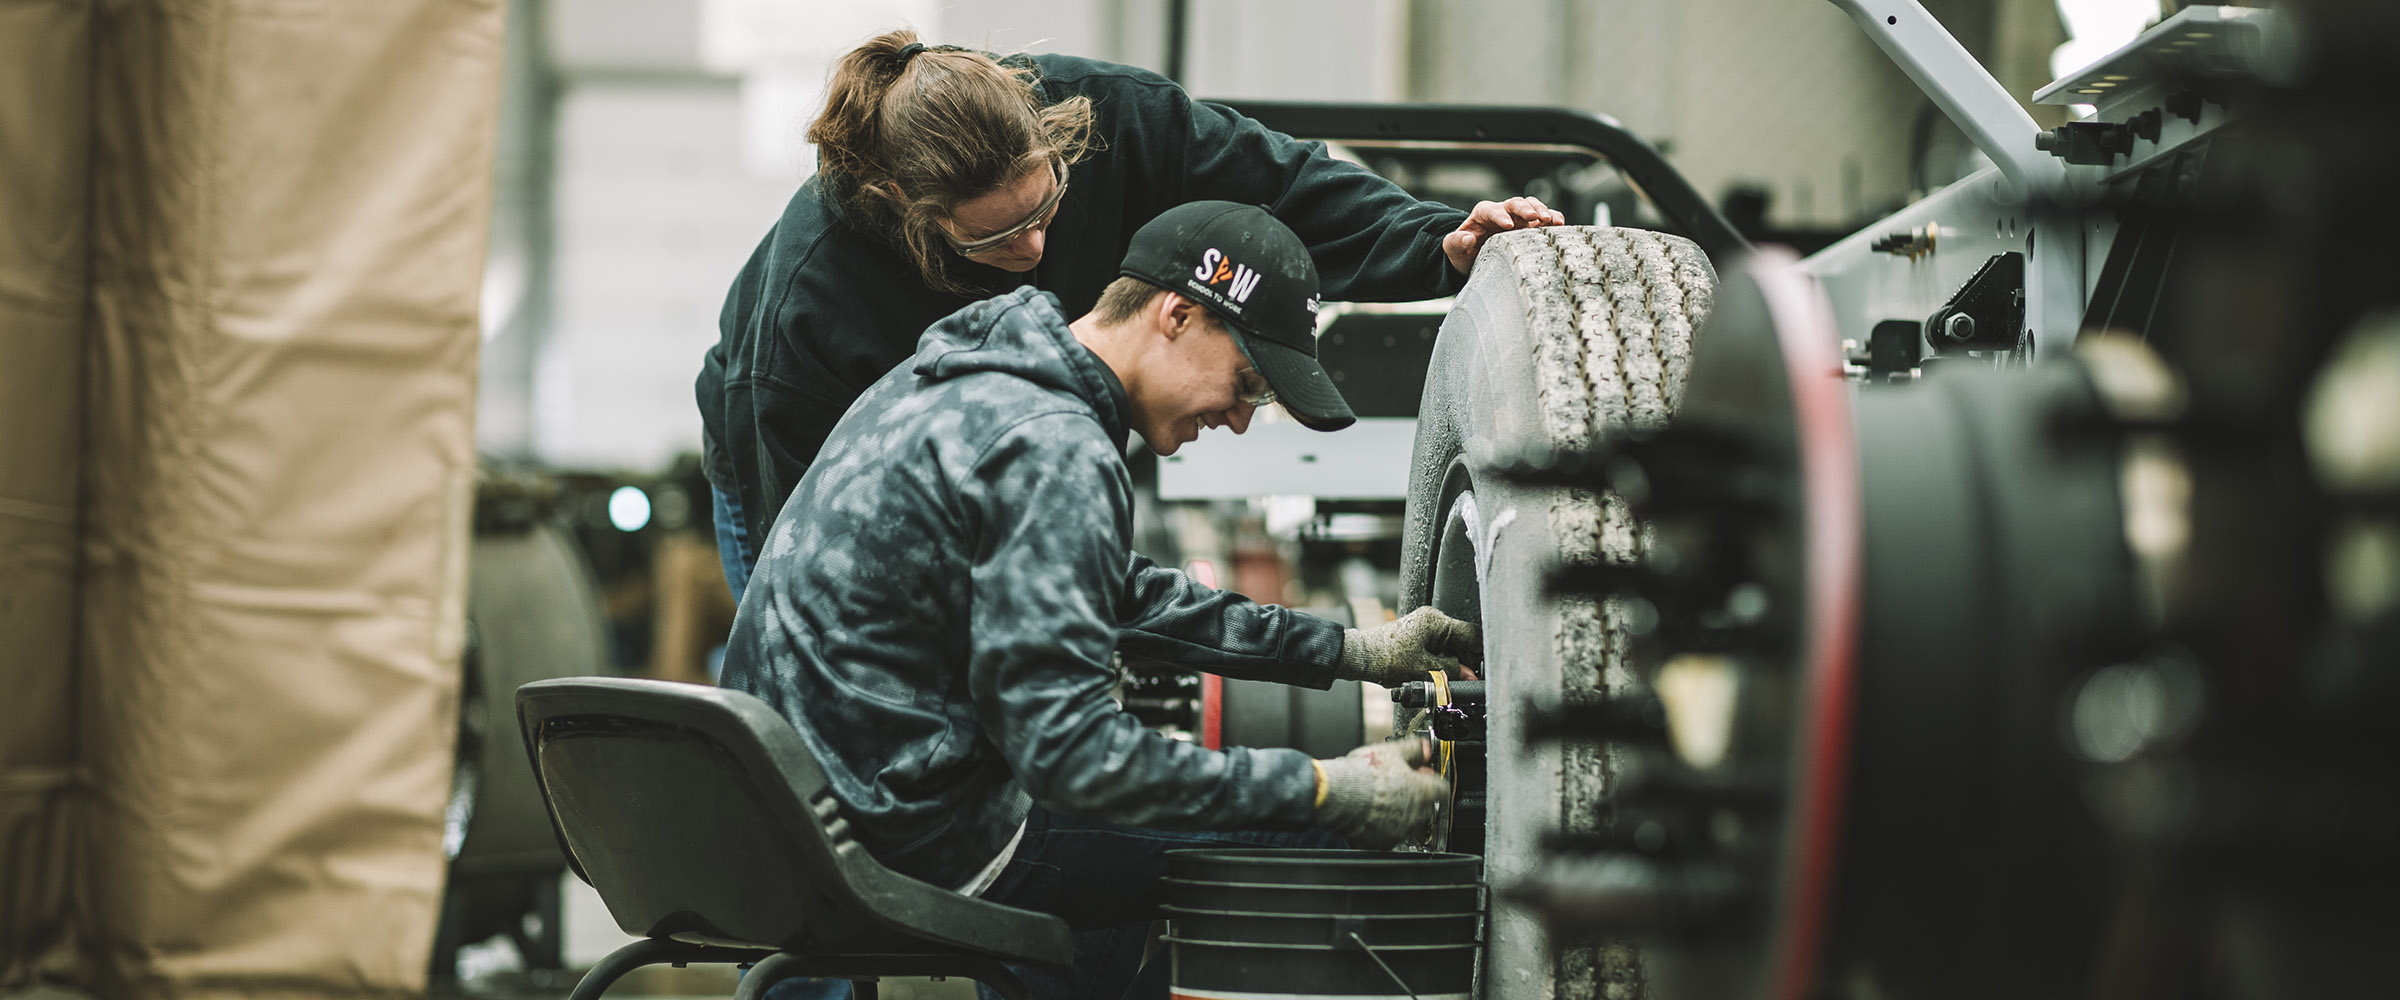 High school student and production worker working on a truck tire